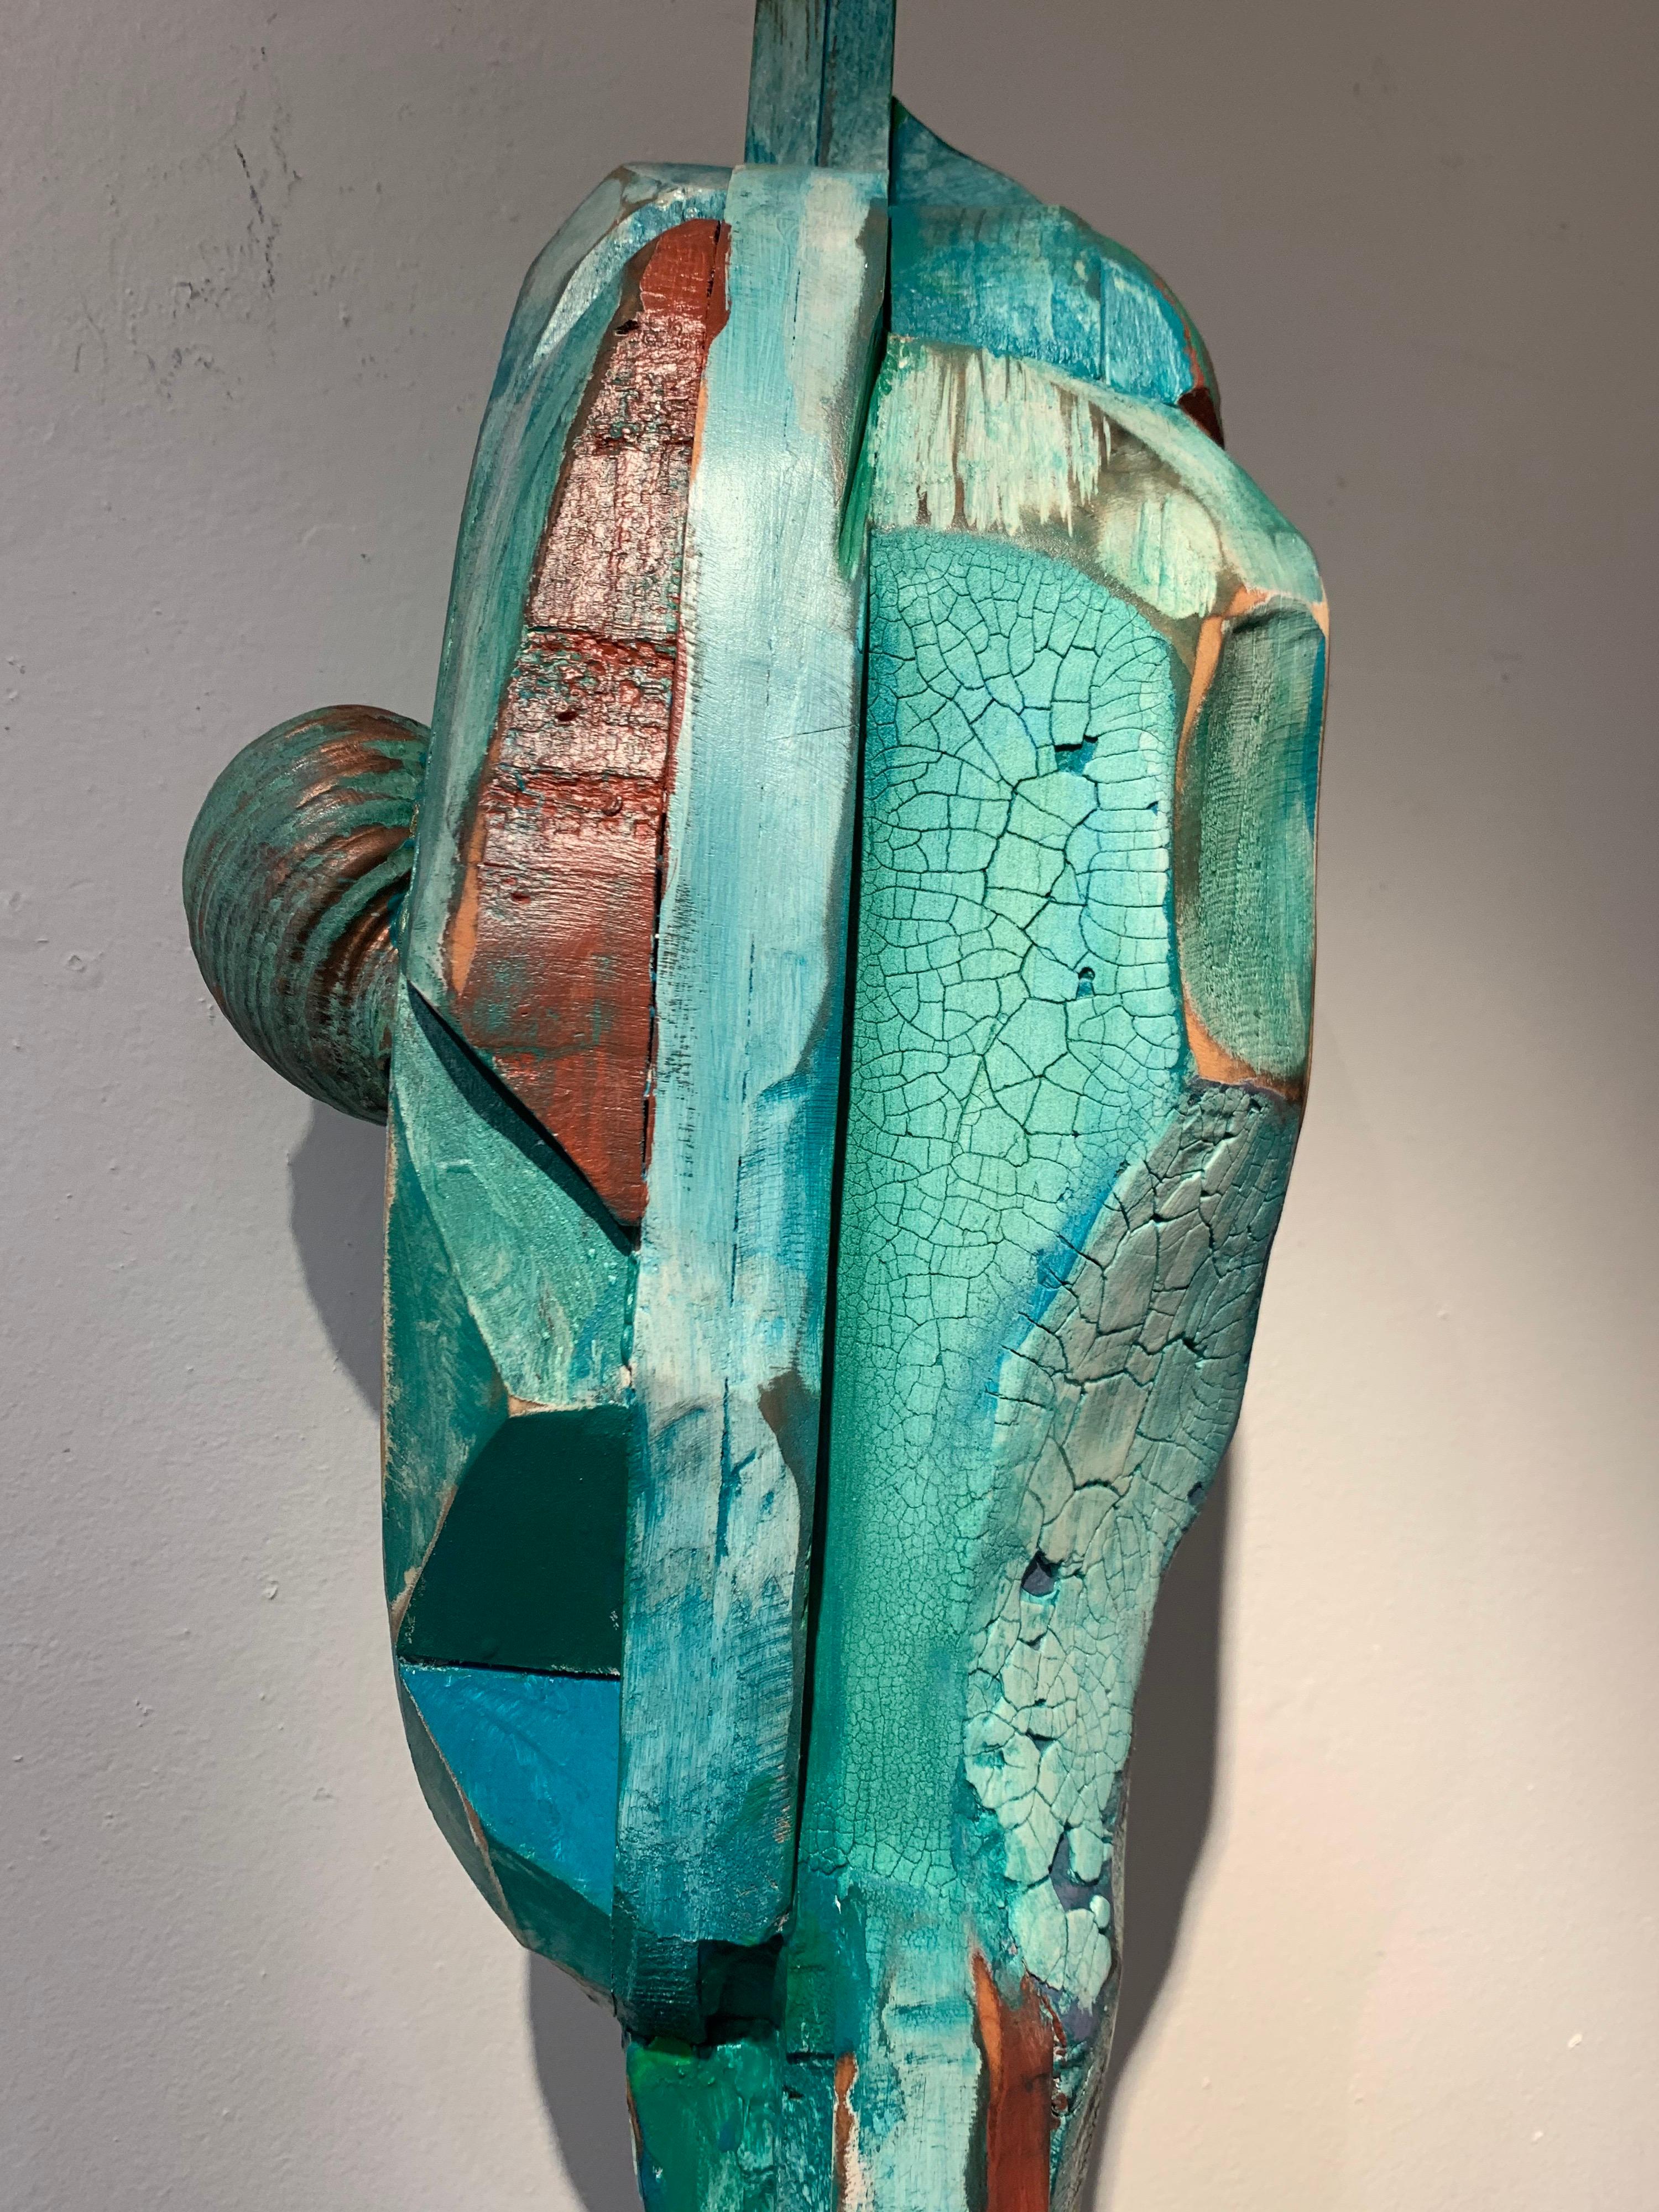 Listening, wood, acrylic, mixed media sculpture, green, blue, off white, brown - Contemporary Sculpture by Chris Reilly